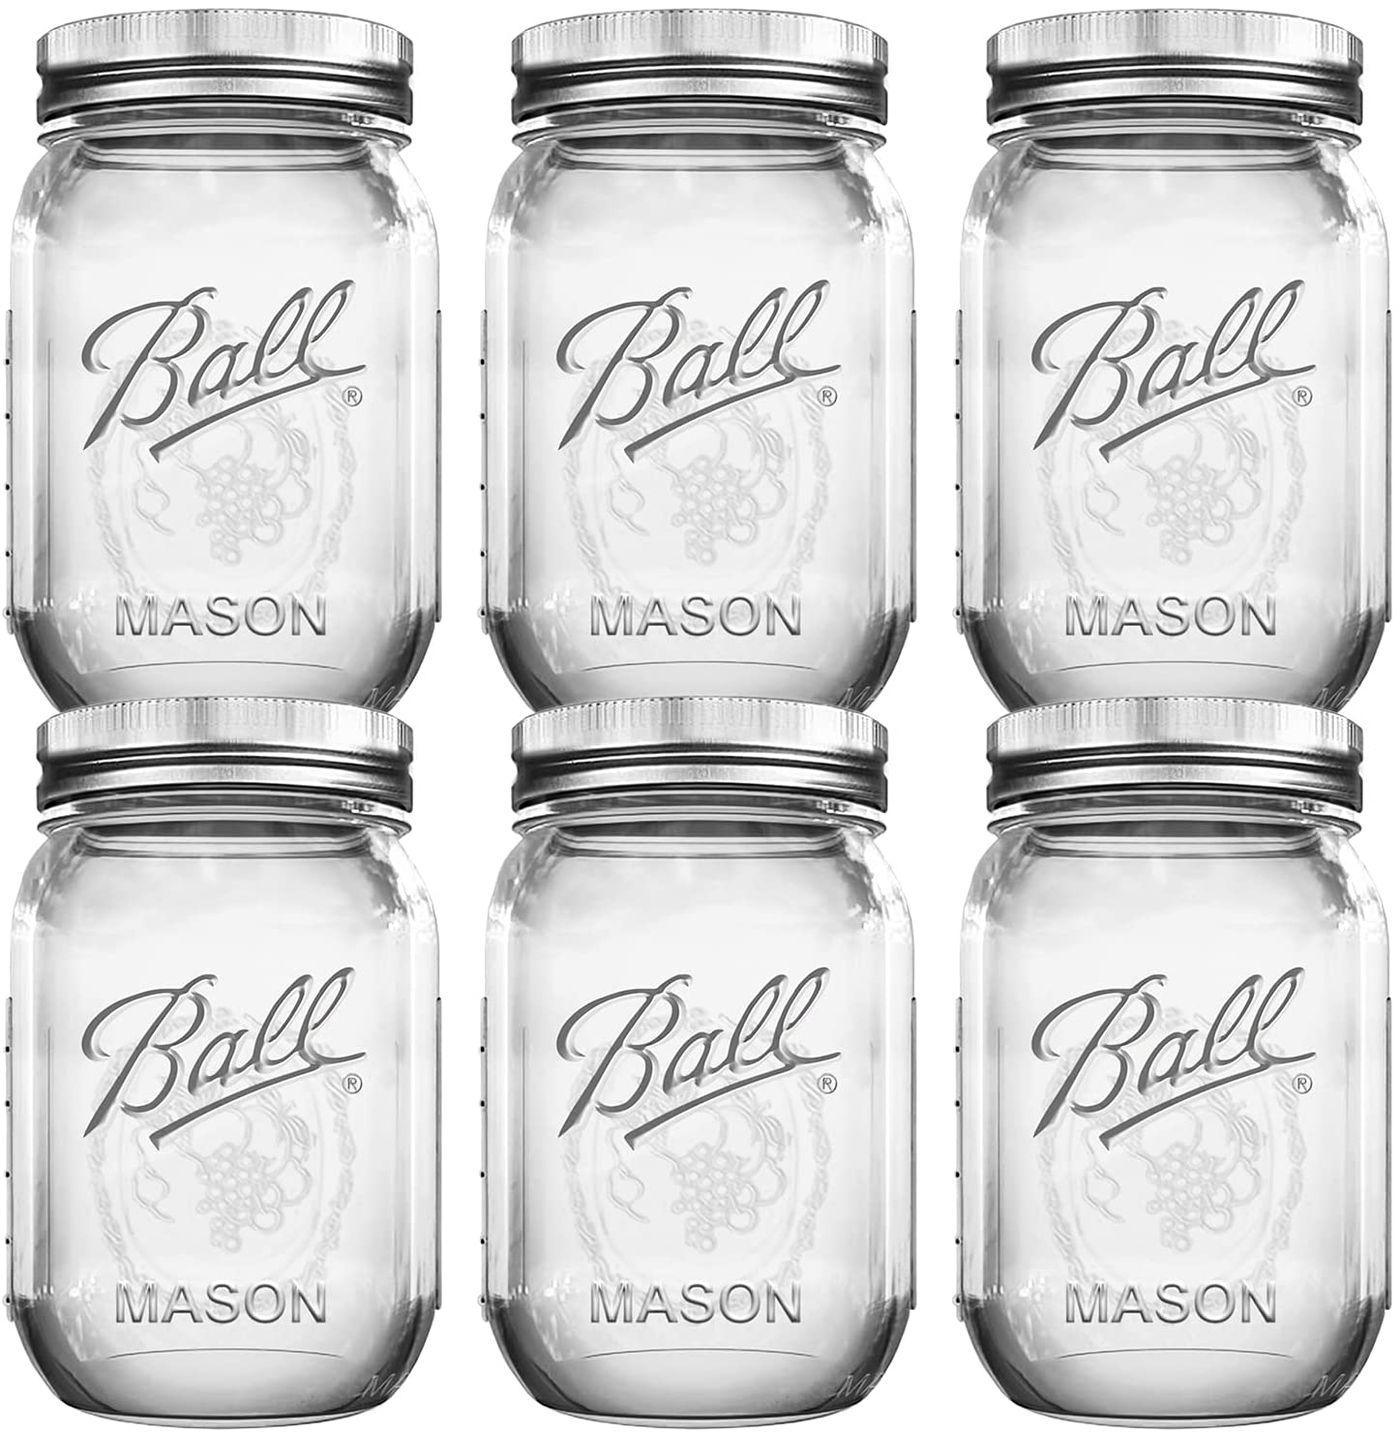 Ball Mason Jars 16 oz Bundle with Non Slip Jar Opener brand BHL Jars Set of 6 - 16 Ounce Size Mason Jars with Regular Mouth - Canning Glass Jars with Lids, Heritage Collection